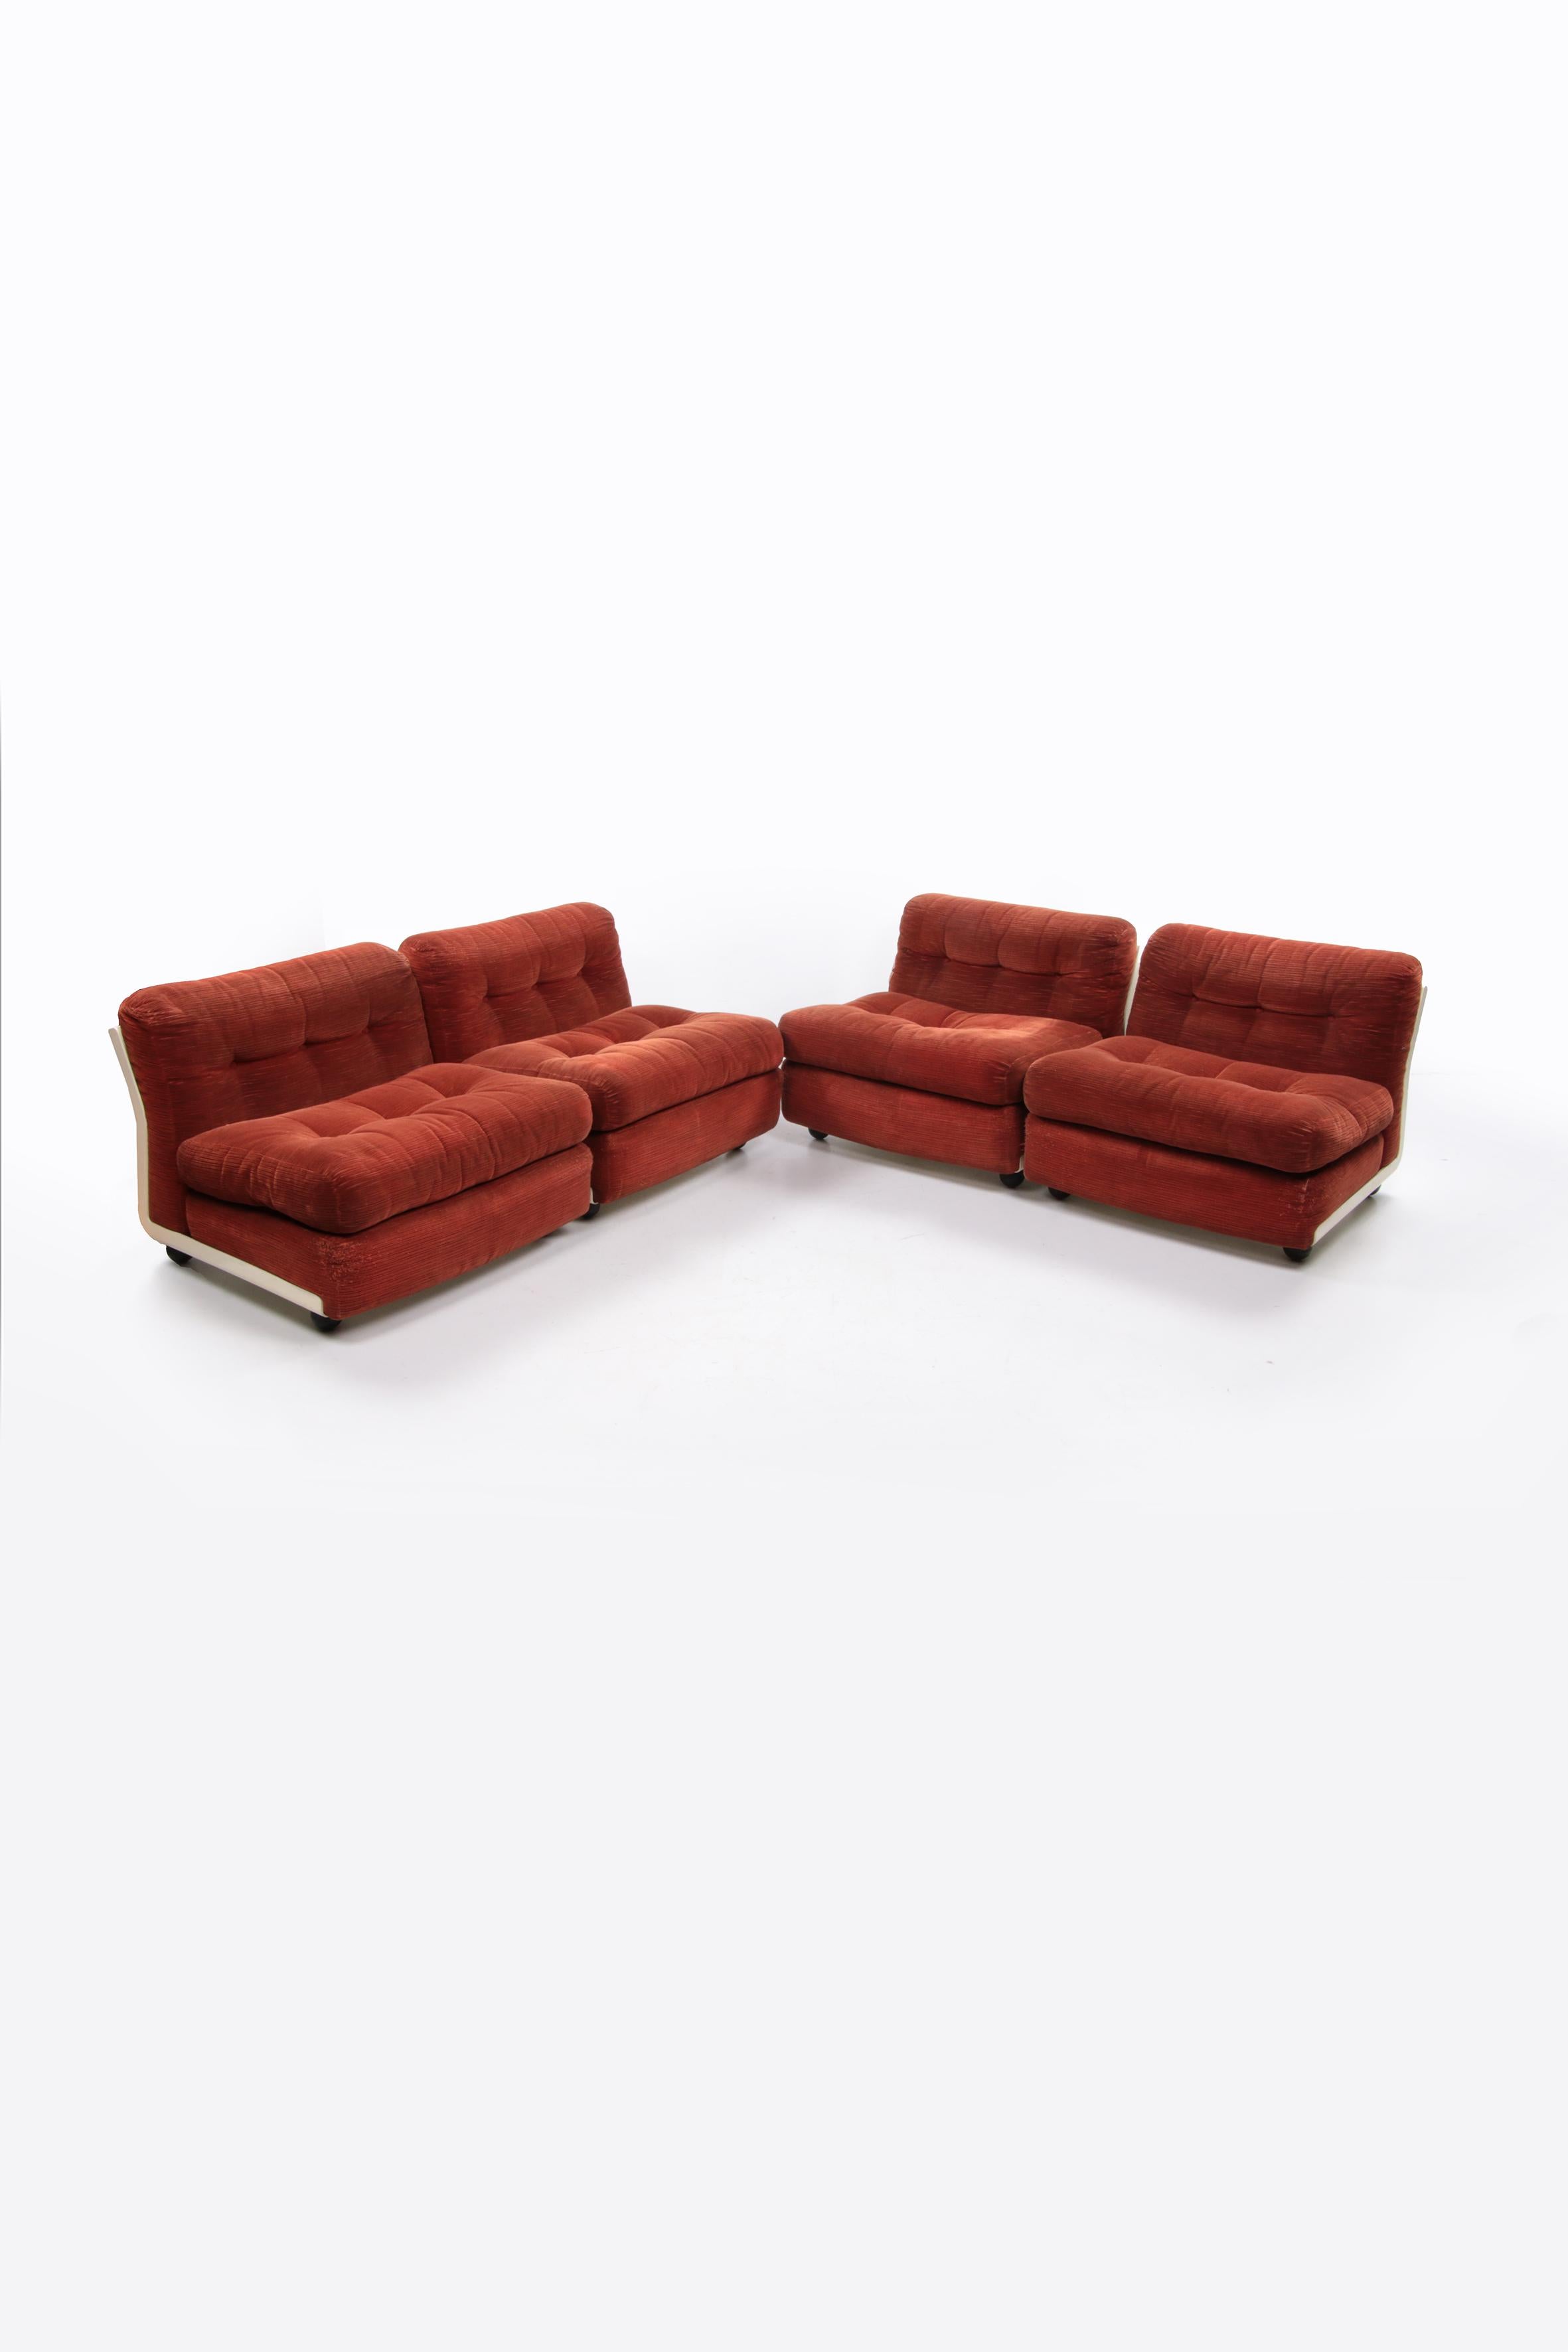 Mario Bellini sofa set of 4 made by C&B Italia, 1970


C&B Italia 'Amanta' from the 1970s, modular sofa with four armchairs designed by Mario Bellini in 1966.

Manufactured in 1973. C&B Italia is now known as c&B Italia. The four armchairs